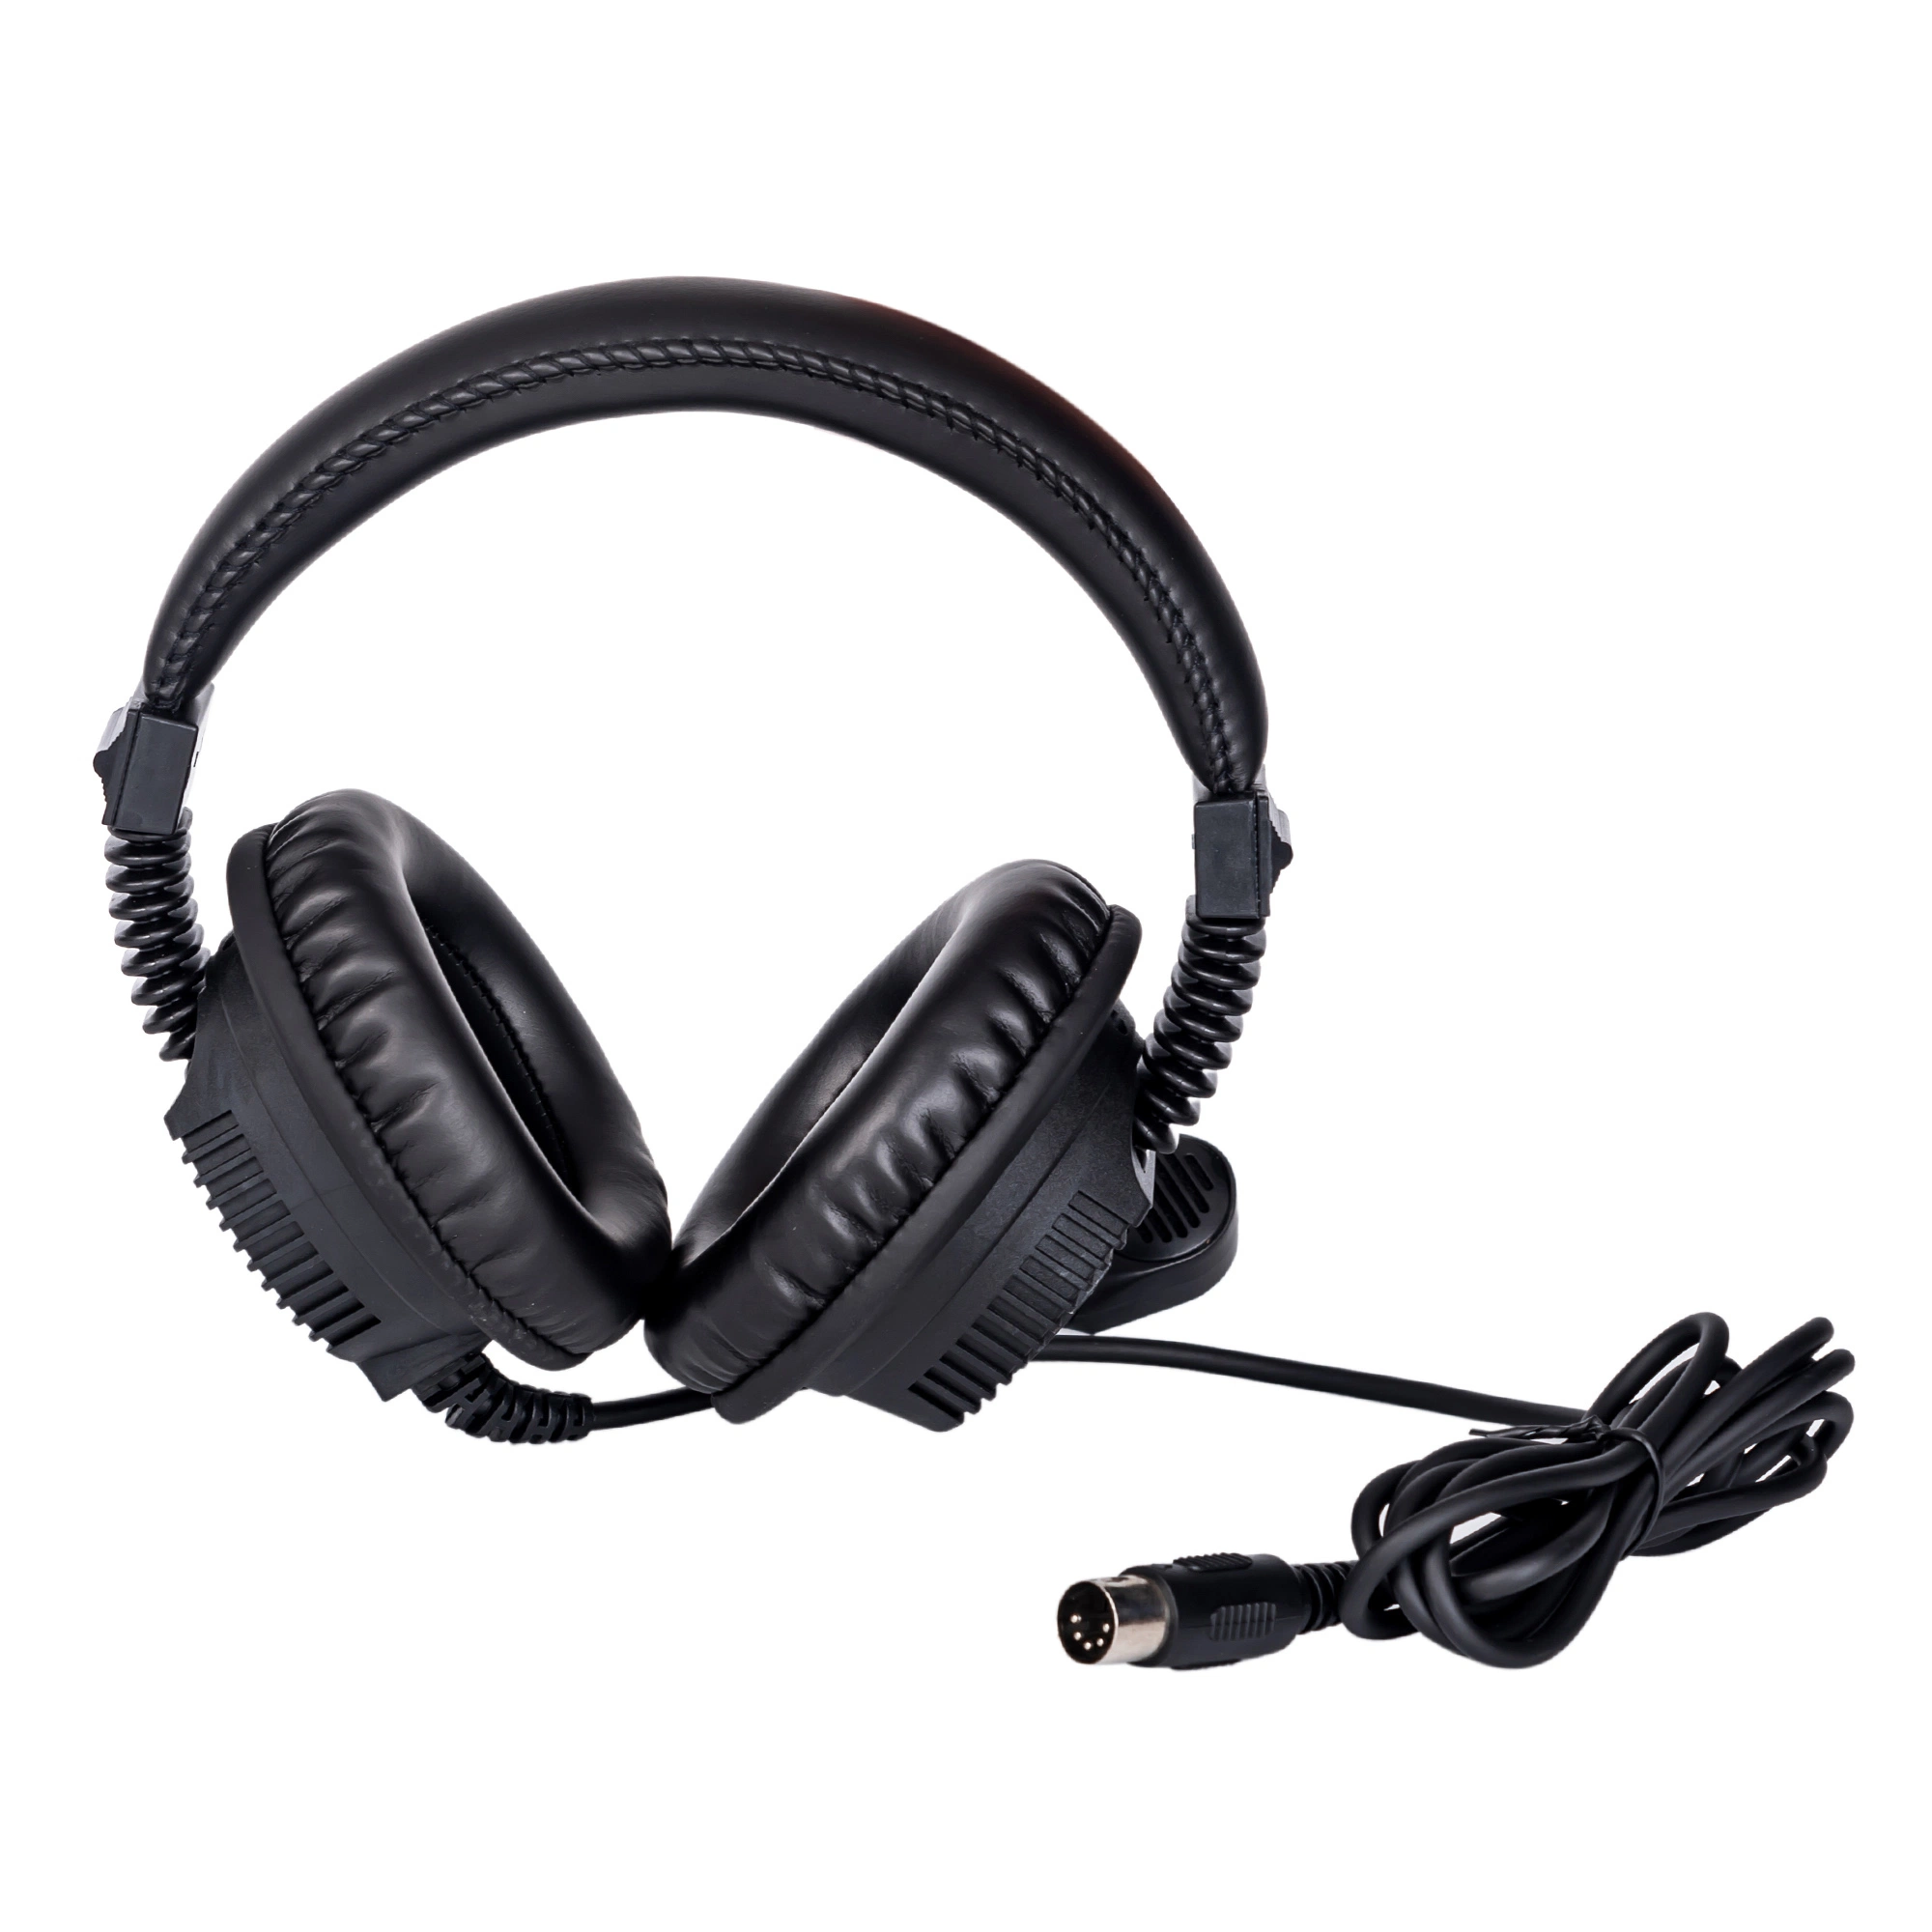 Headset 3.5mm Language Lab Headset Headphone CE RoHS OEM Available Forfor PC Mobile Lab Wired Cable Noise Cancelling Professional Factory Directly